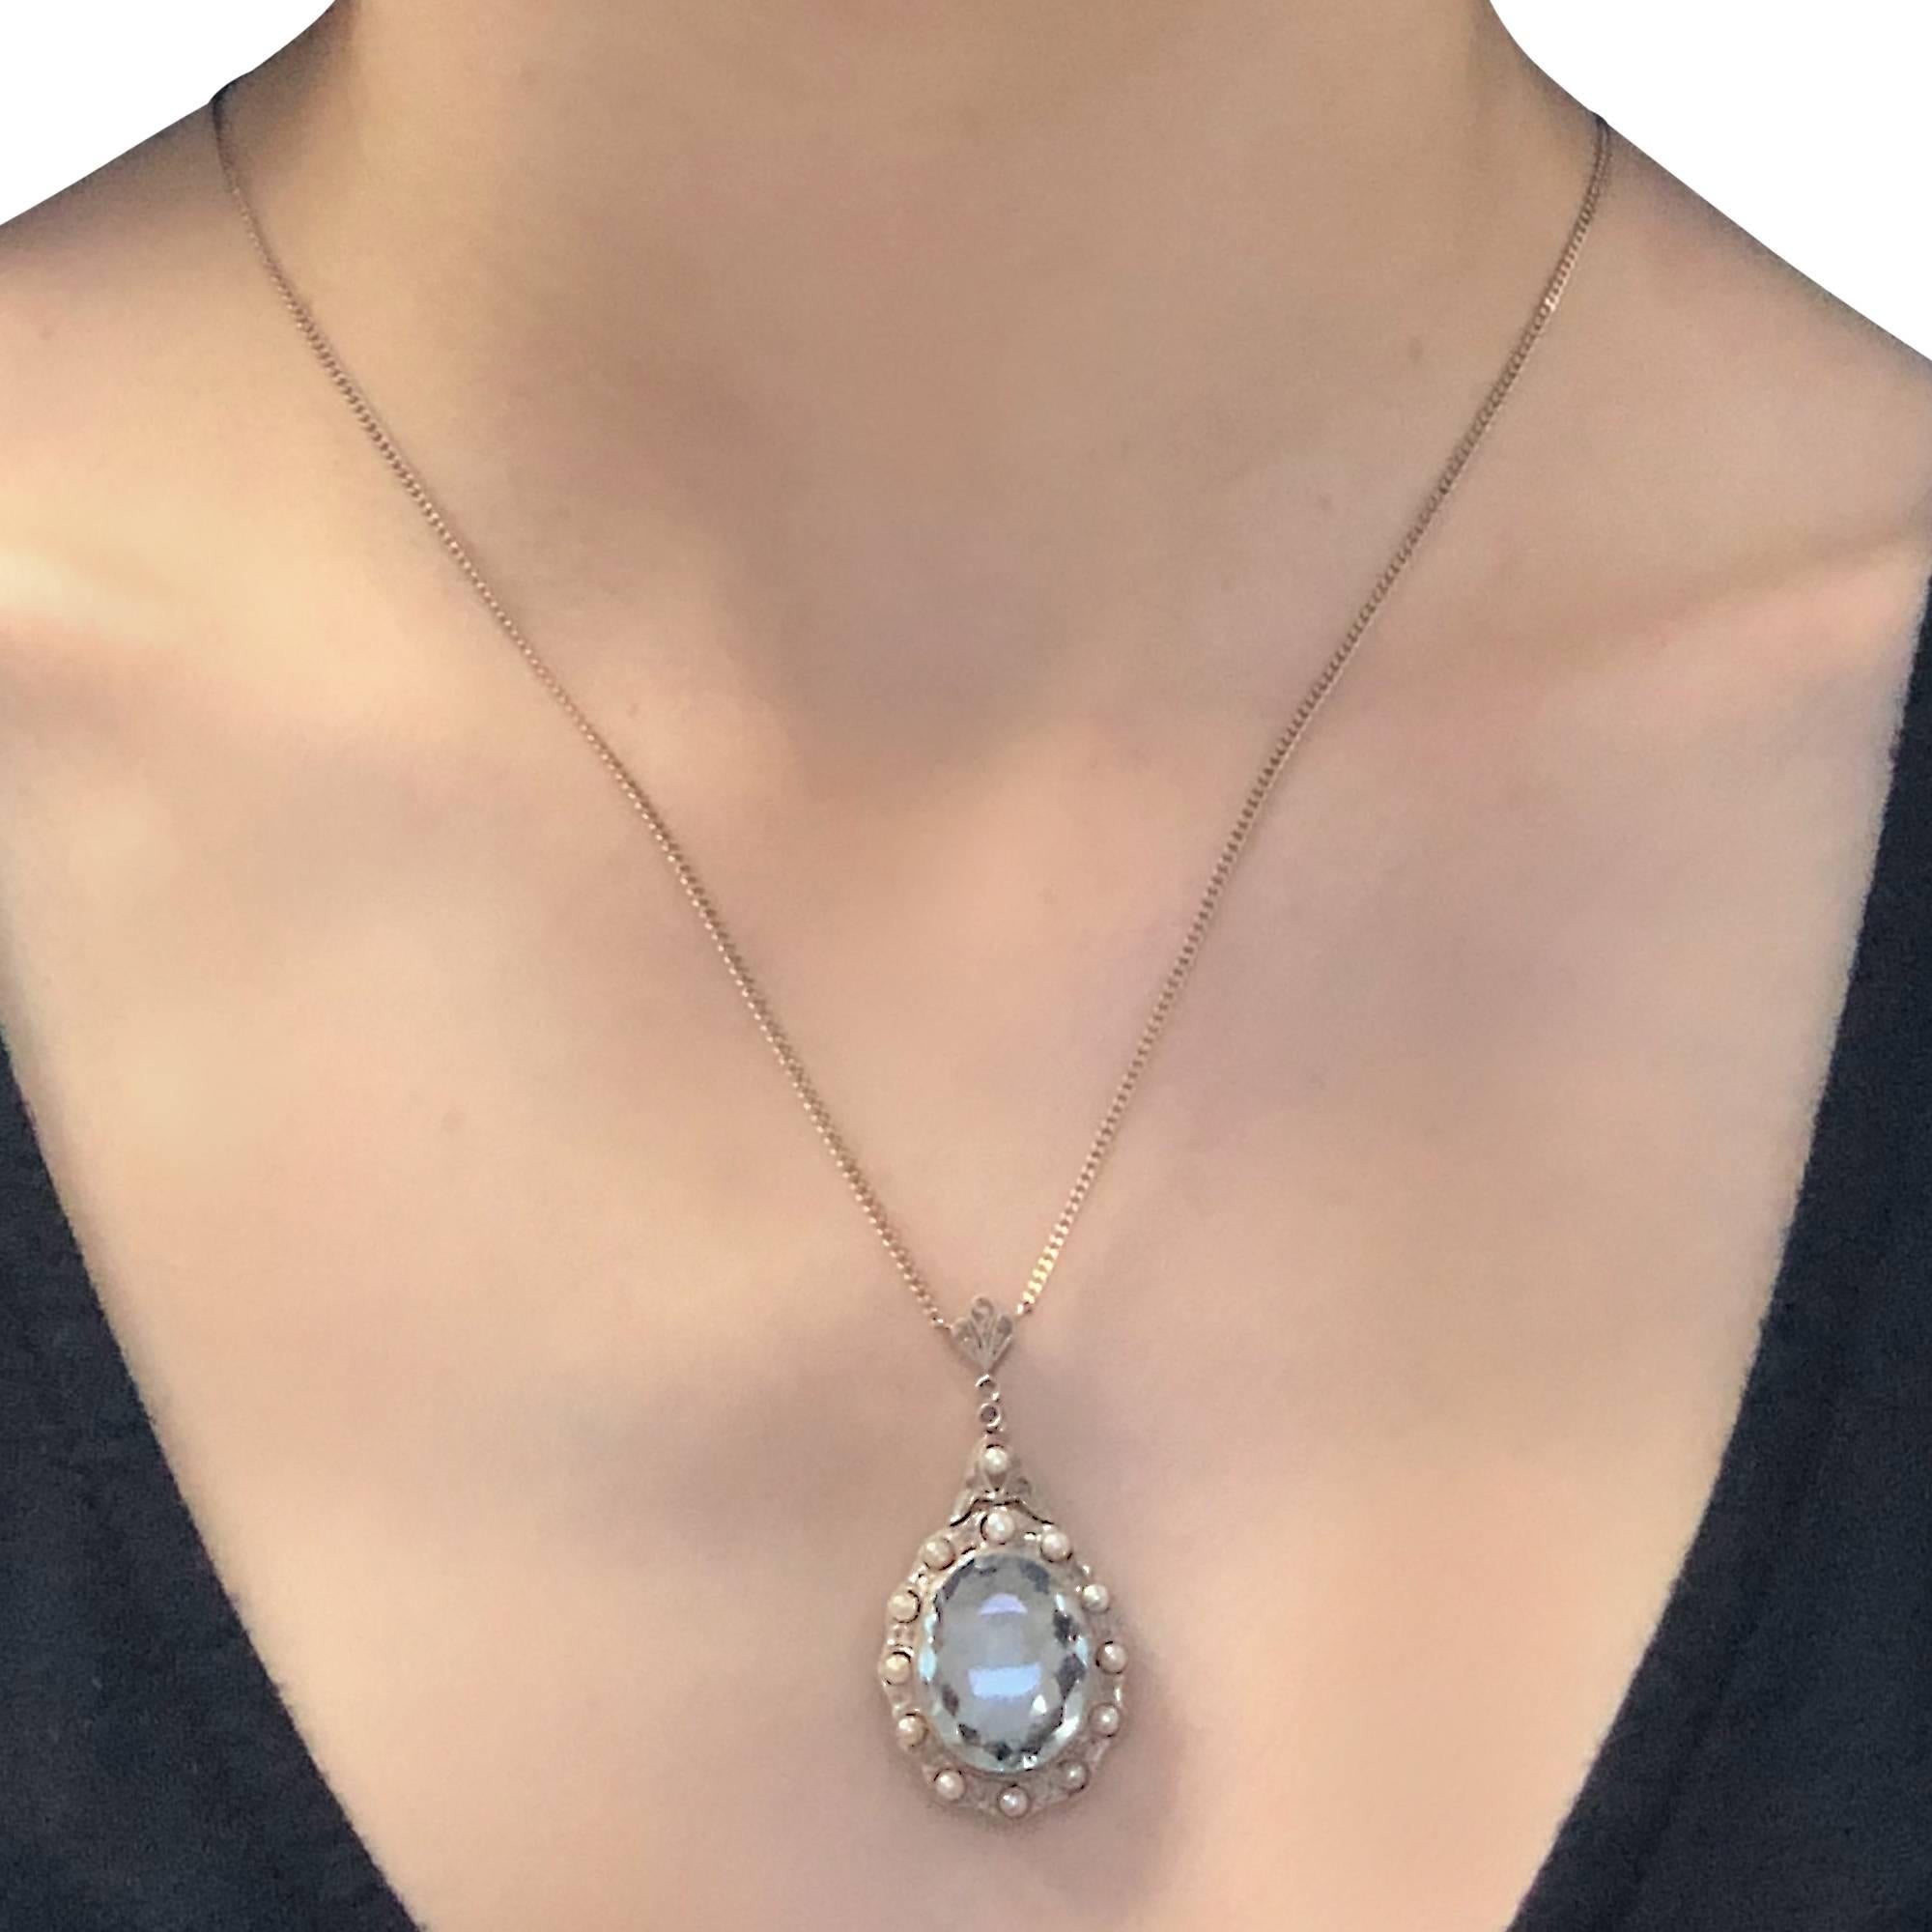 Edwardian 14k yellow and white gold pendant featuring a light blue oval shaped Aquamarine weighing approximately 7 carats, framed in millegrain, surrounded by alternating rose cut diamonds and pearls, suspended from a 14k white gold necklace. The